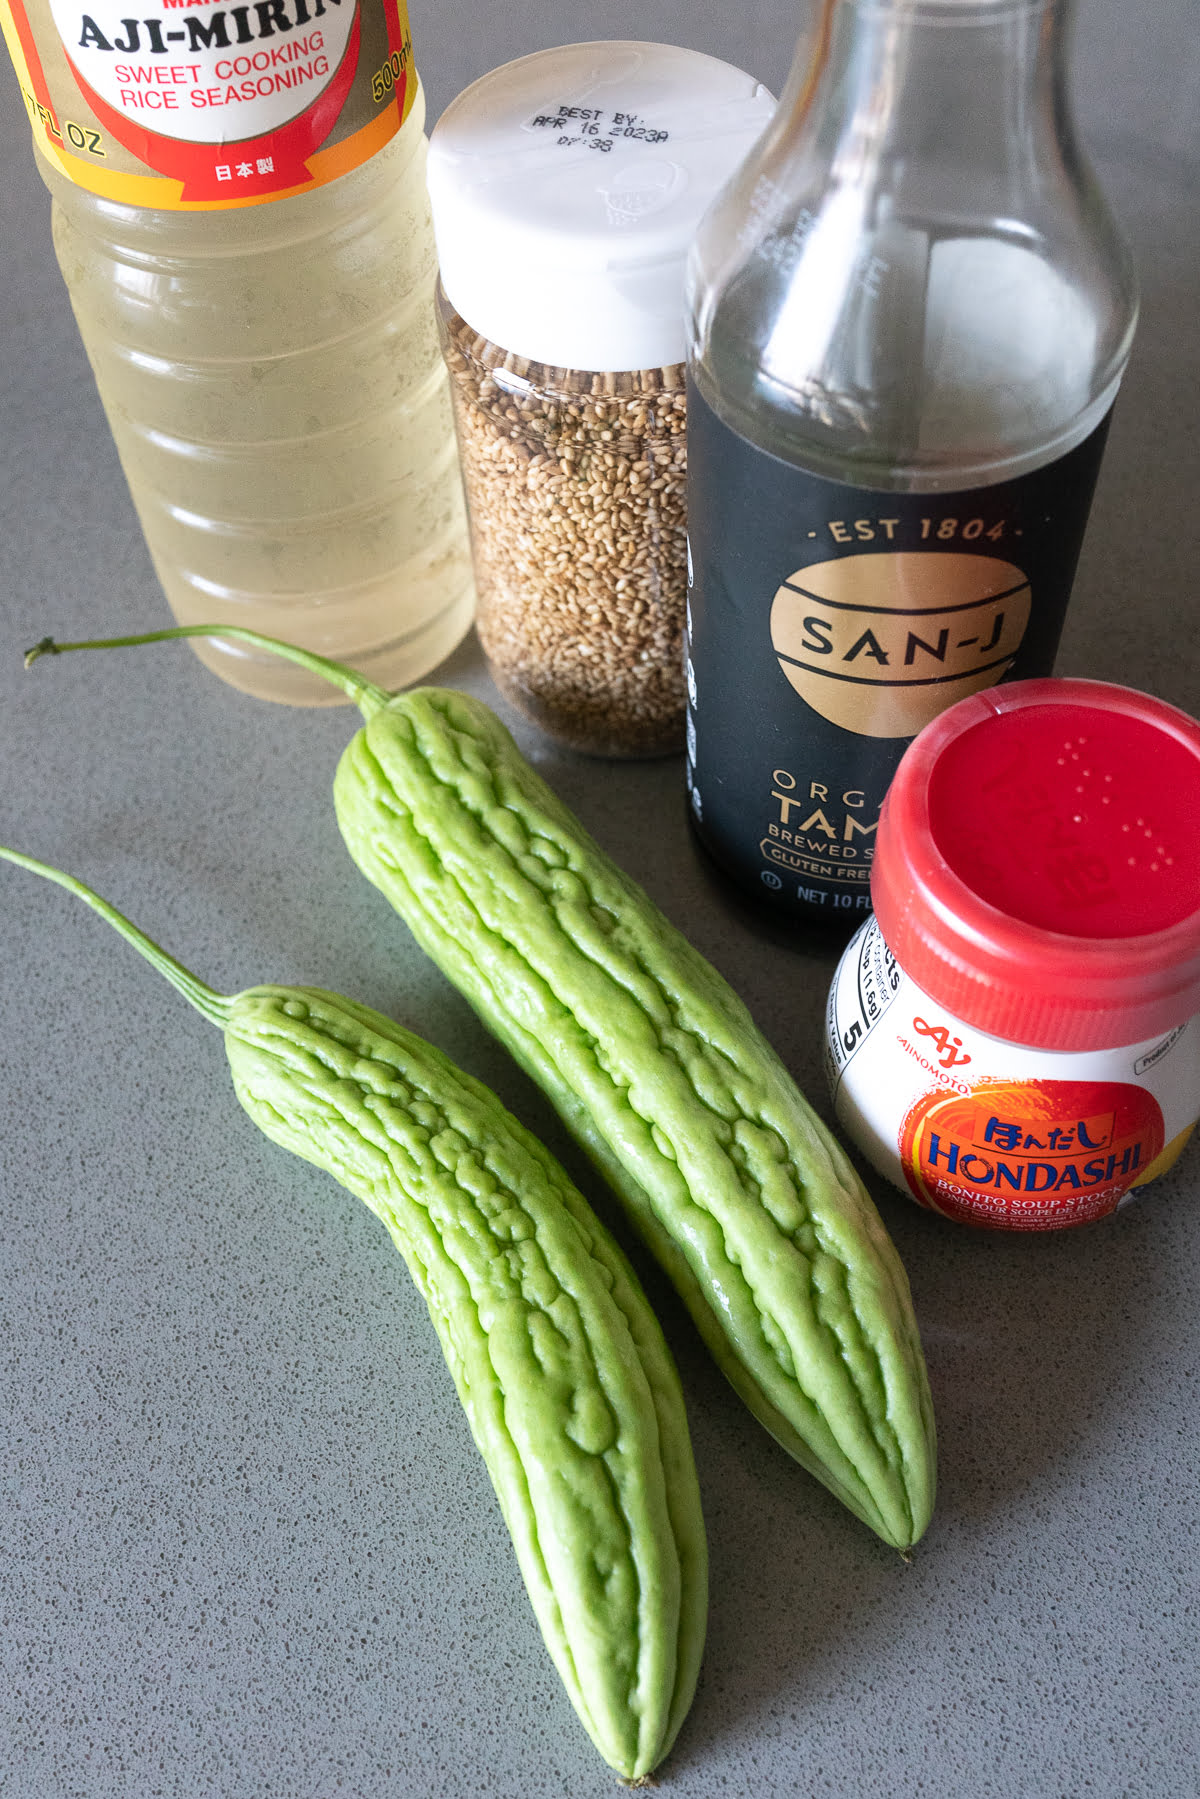 Ingredients for Bitter Melon Tsukudani on a table (bitter melon, mirin, soy sauce, dashi, and sesame seeds).